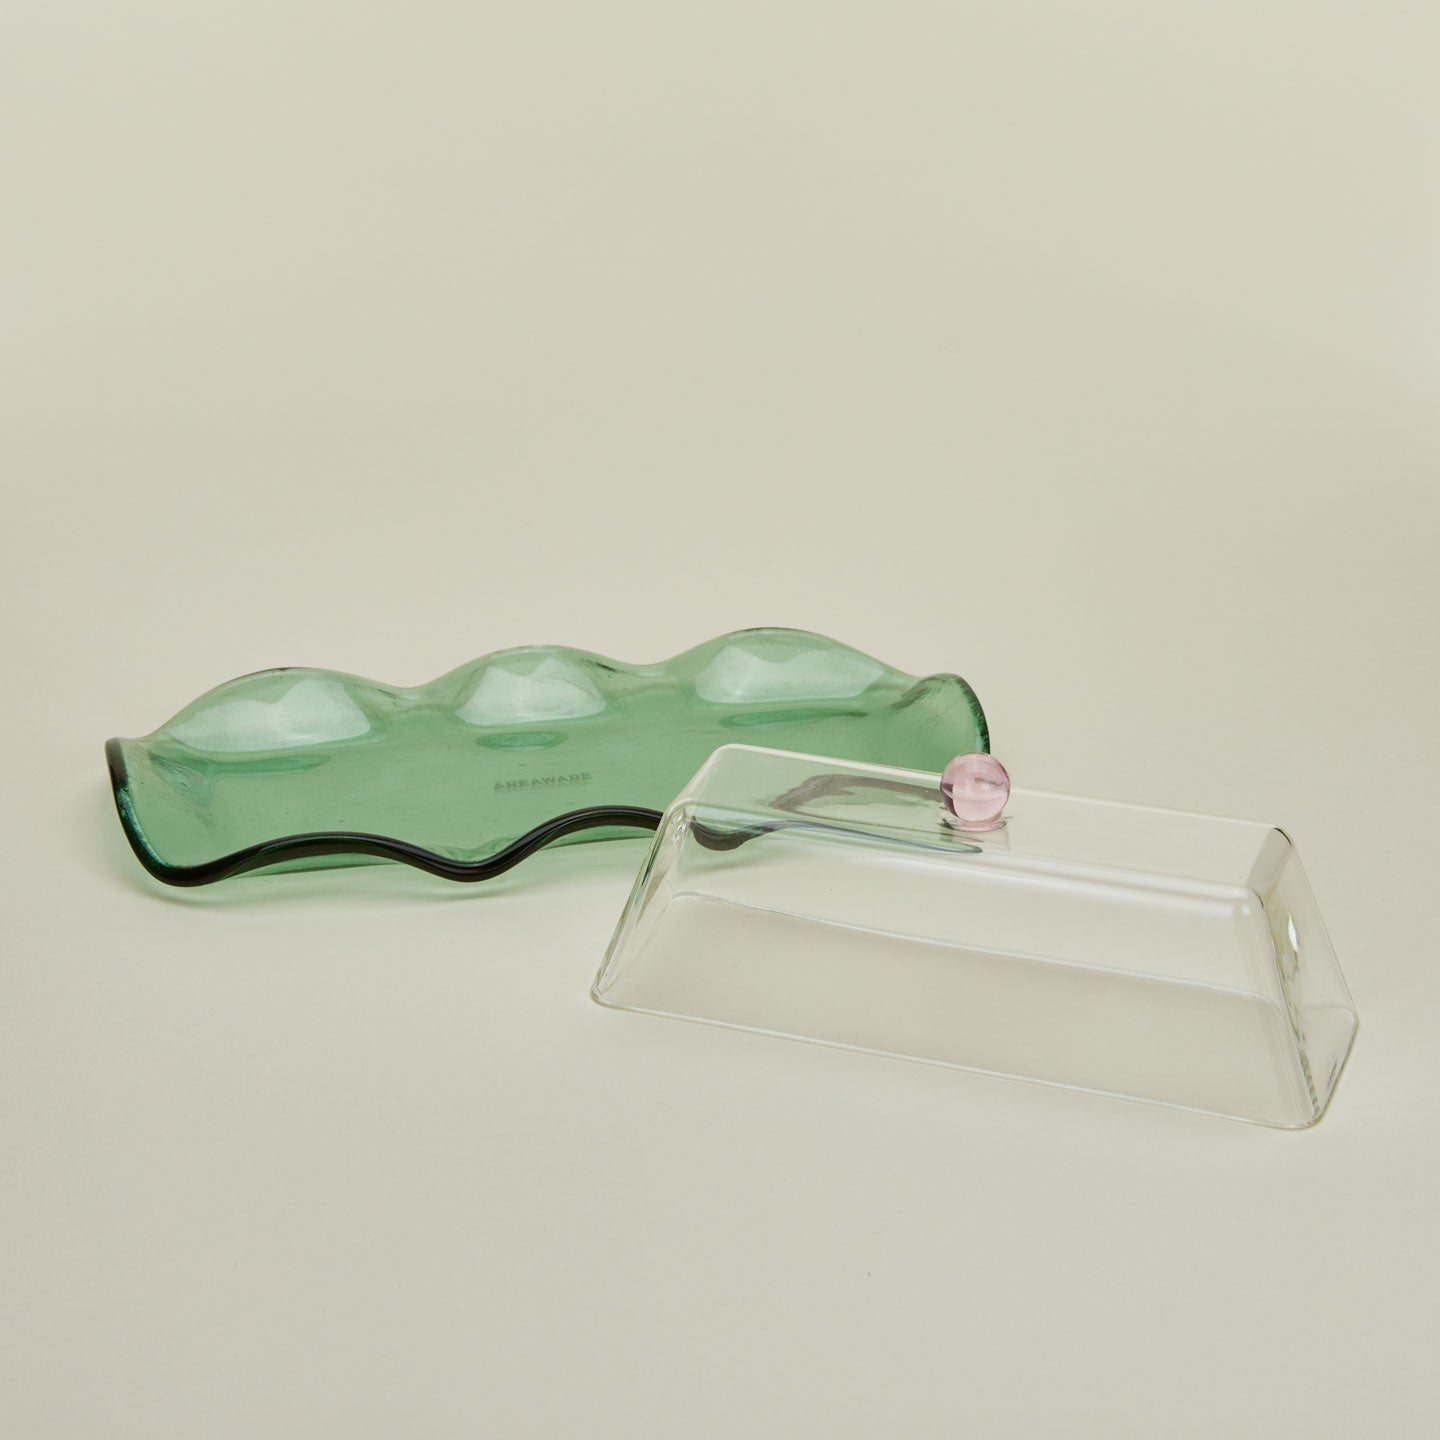 Close up of glass butter dish with a green tray and clear lid with a pink knob.